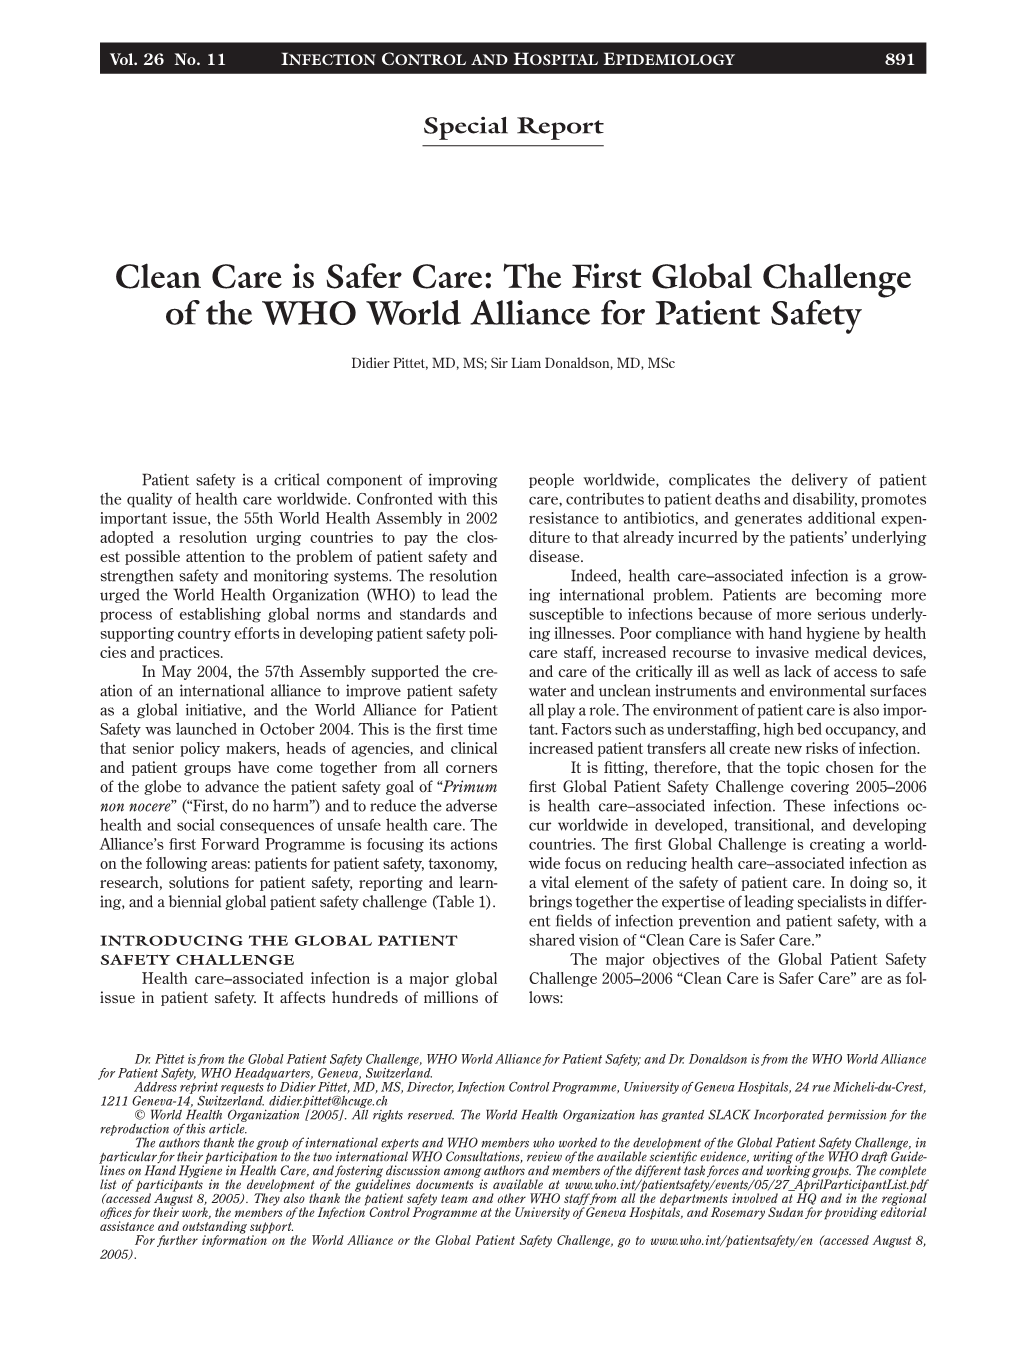 Clean Care Is Safer Care: the First Global Challenge of the WHO World Alliance for Patient Safety